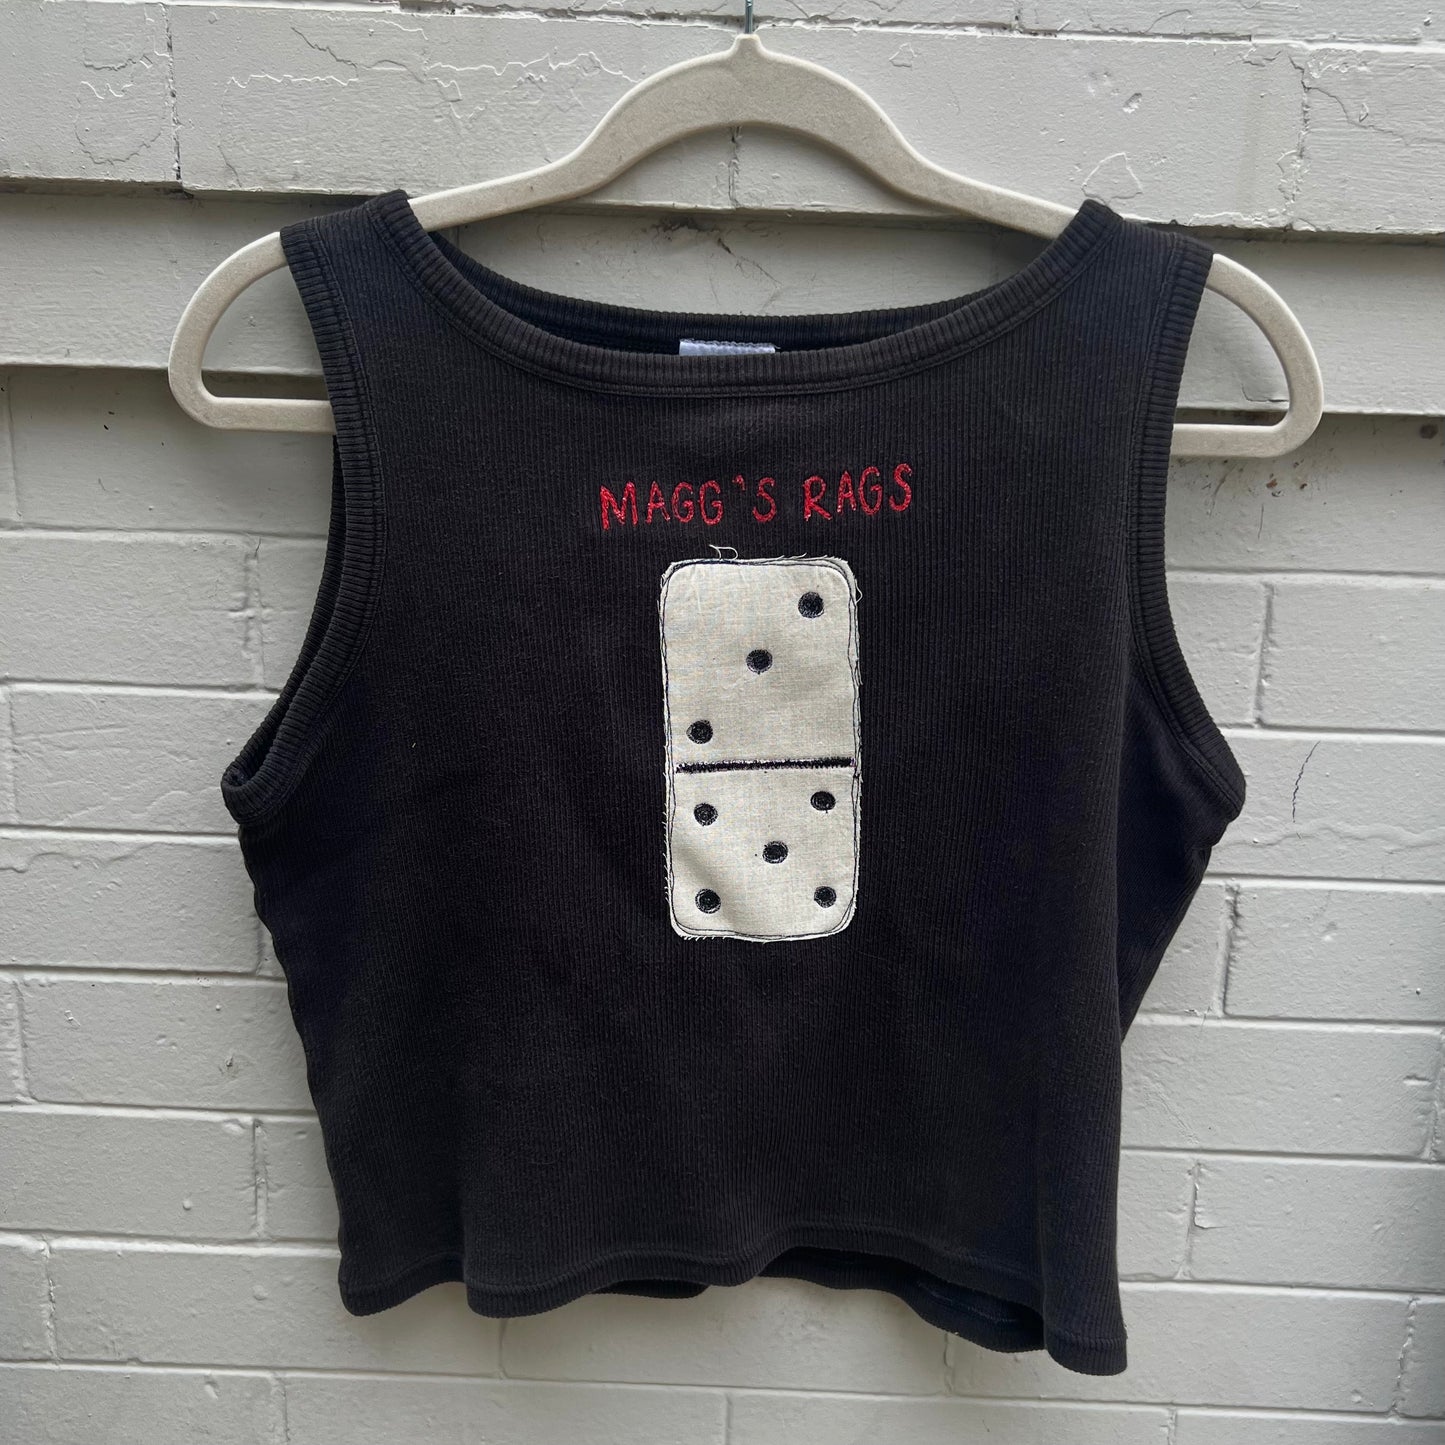 Magg’s rags domino tank